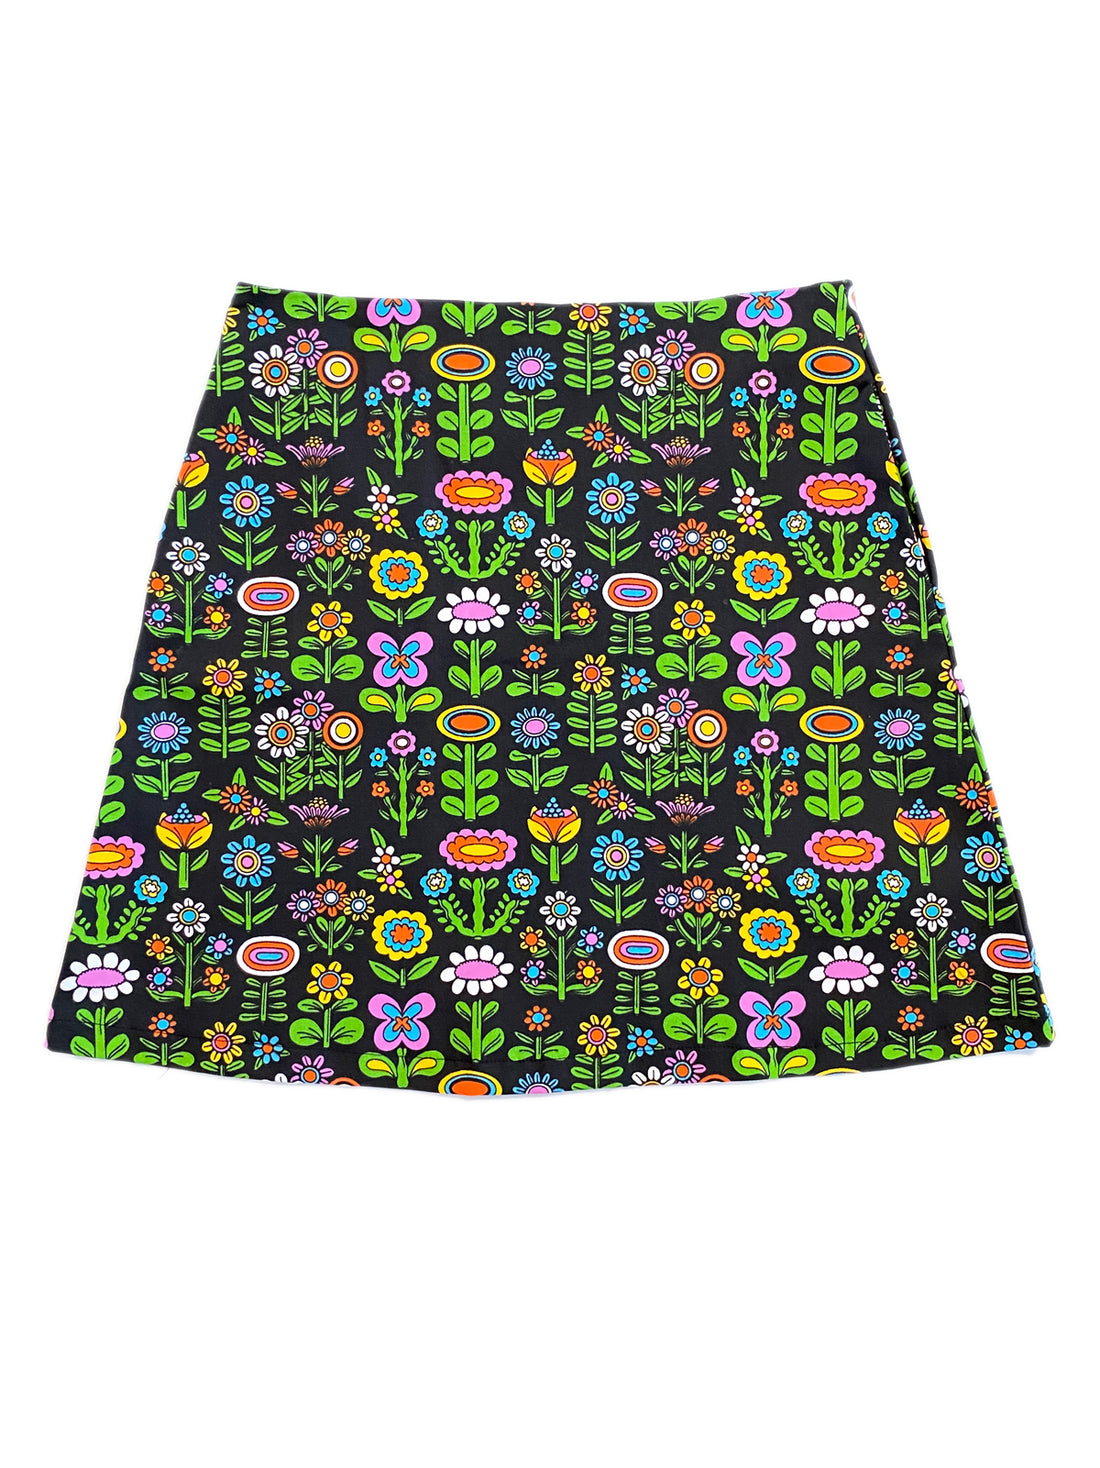 Mini Skirt Awesome Blossoms *last one